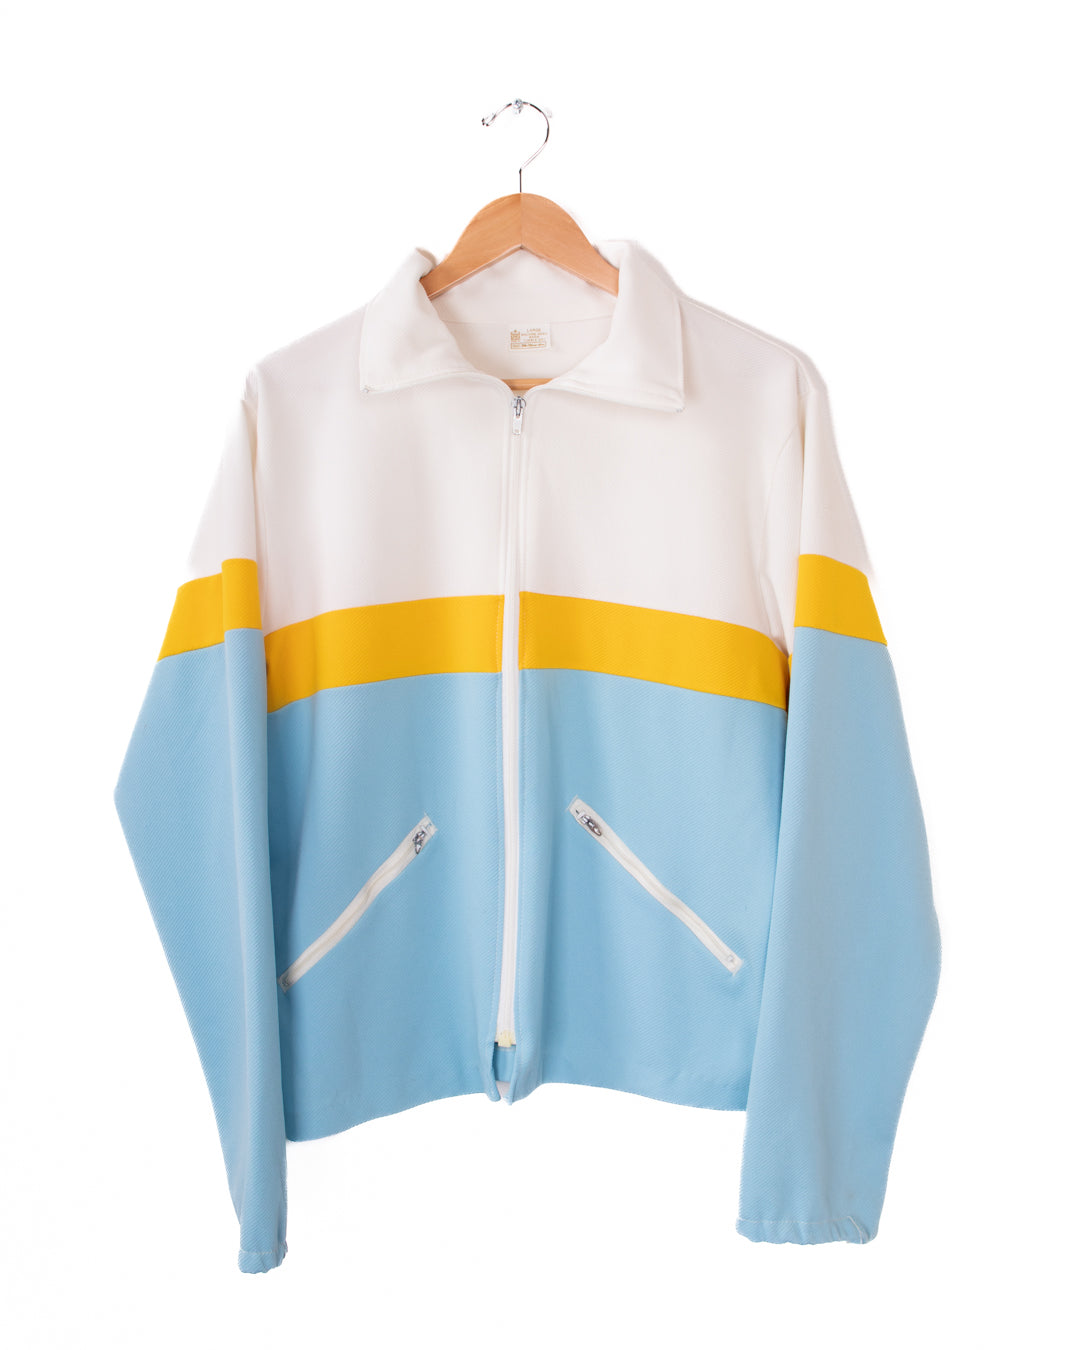 Sears Sky Blue and Yellow White Jacket